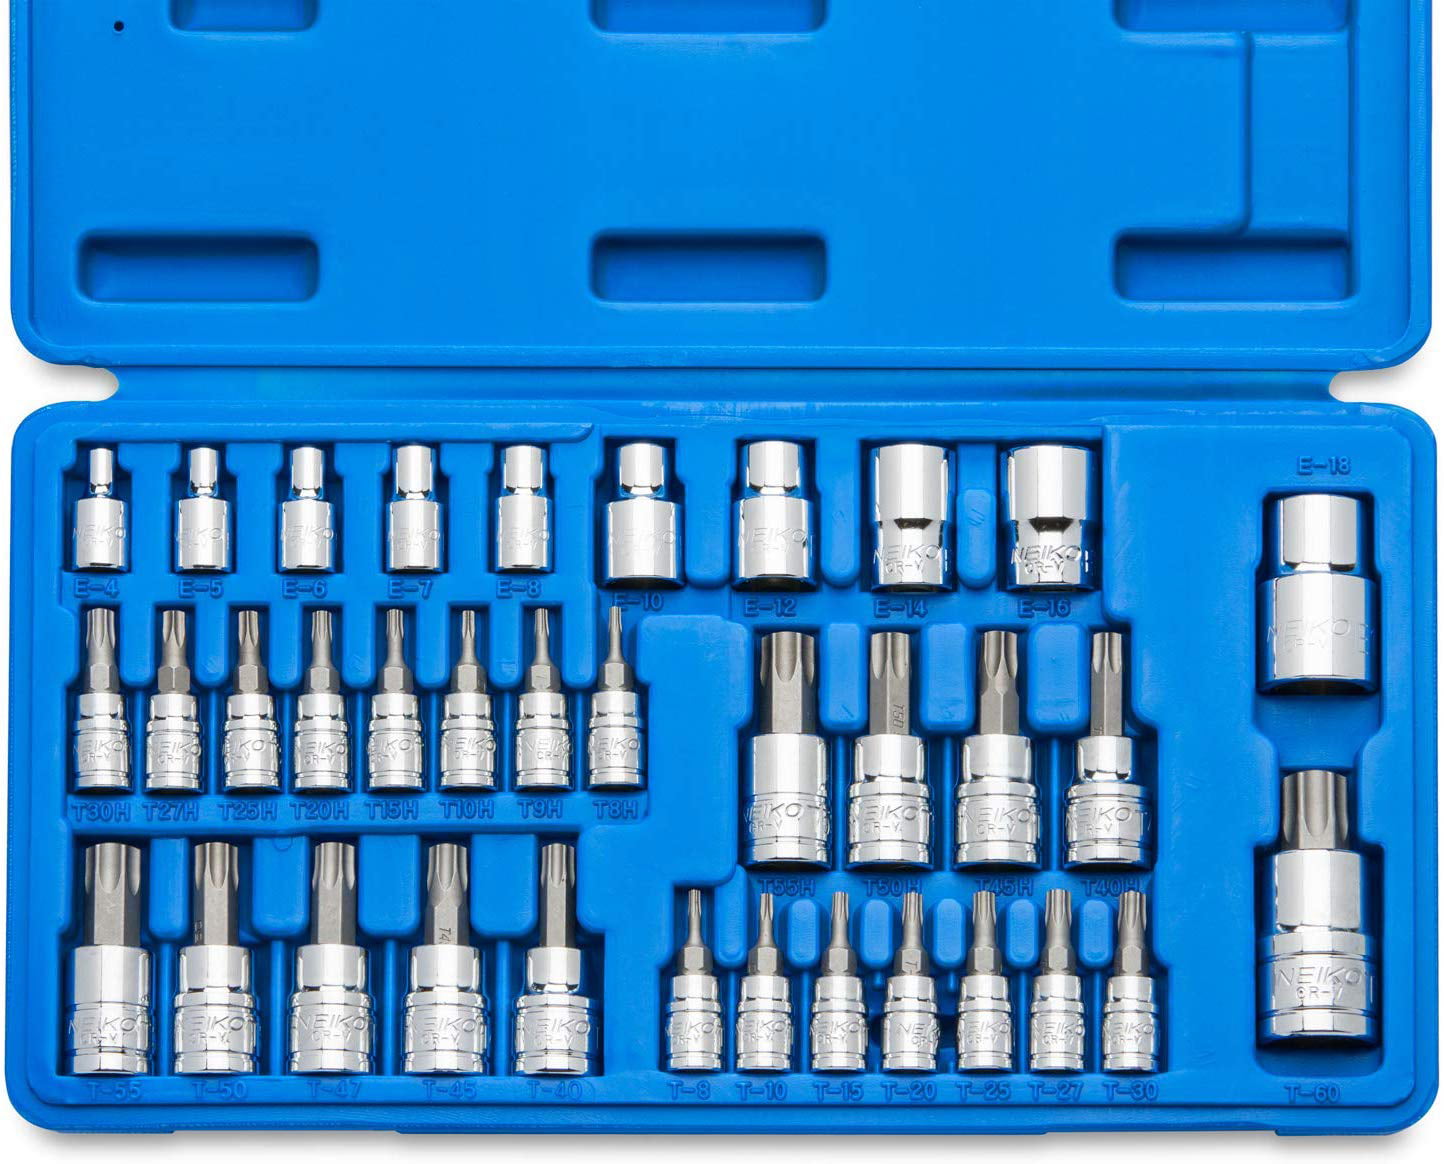 Blackpoolfa 35pc E Tamper Proof Security Star Female 1/4 3/8 1/2 Inch Chrome Vanadium Steel 35-Piece External Female Socket and Torx Bits Socket Set with Carry Box 